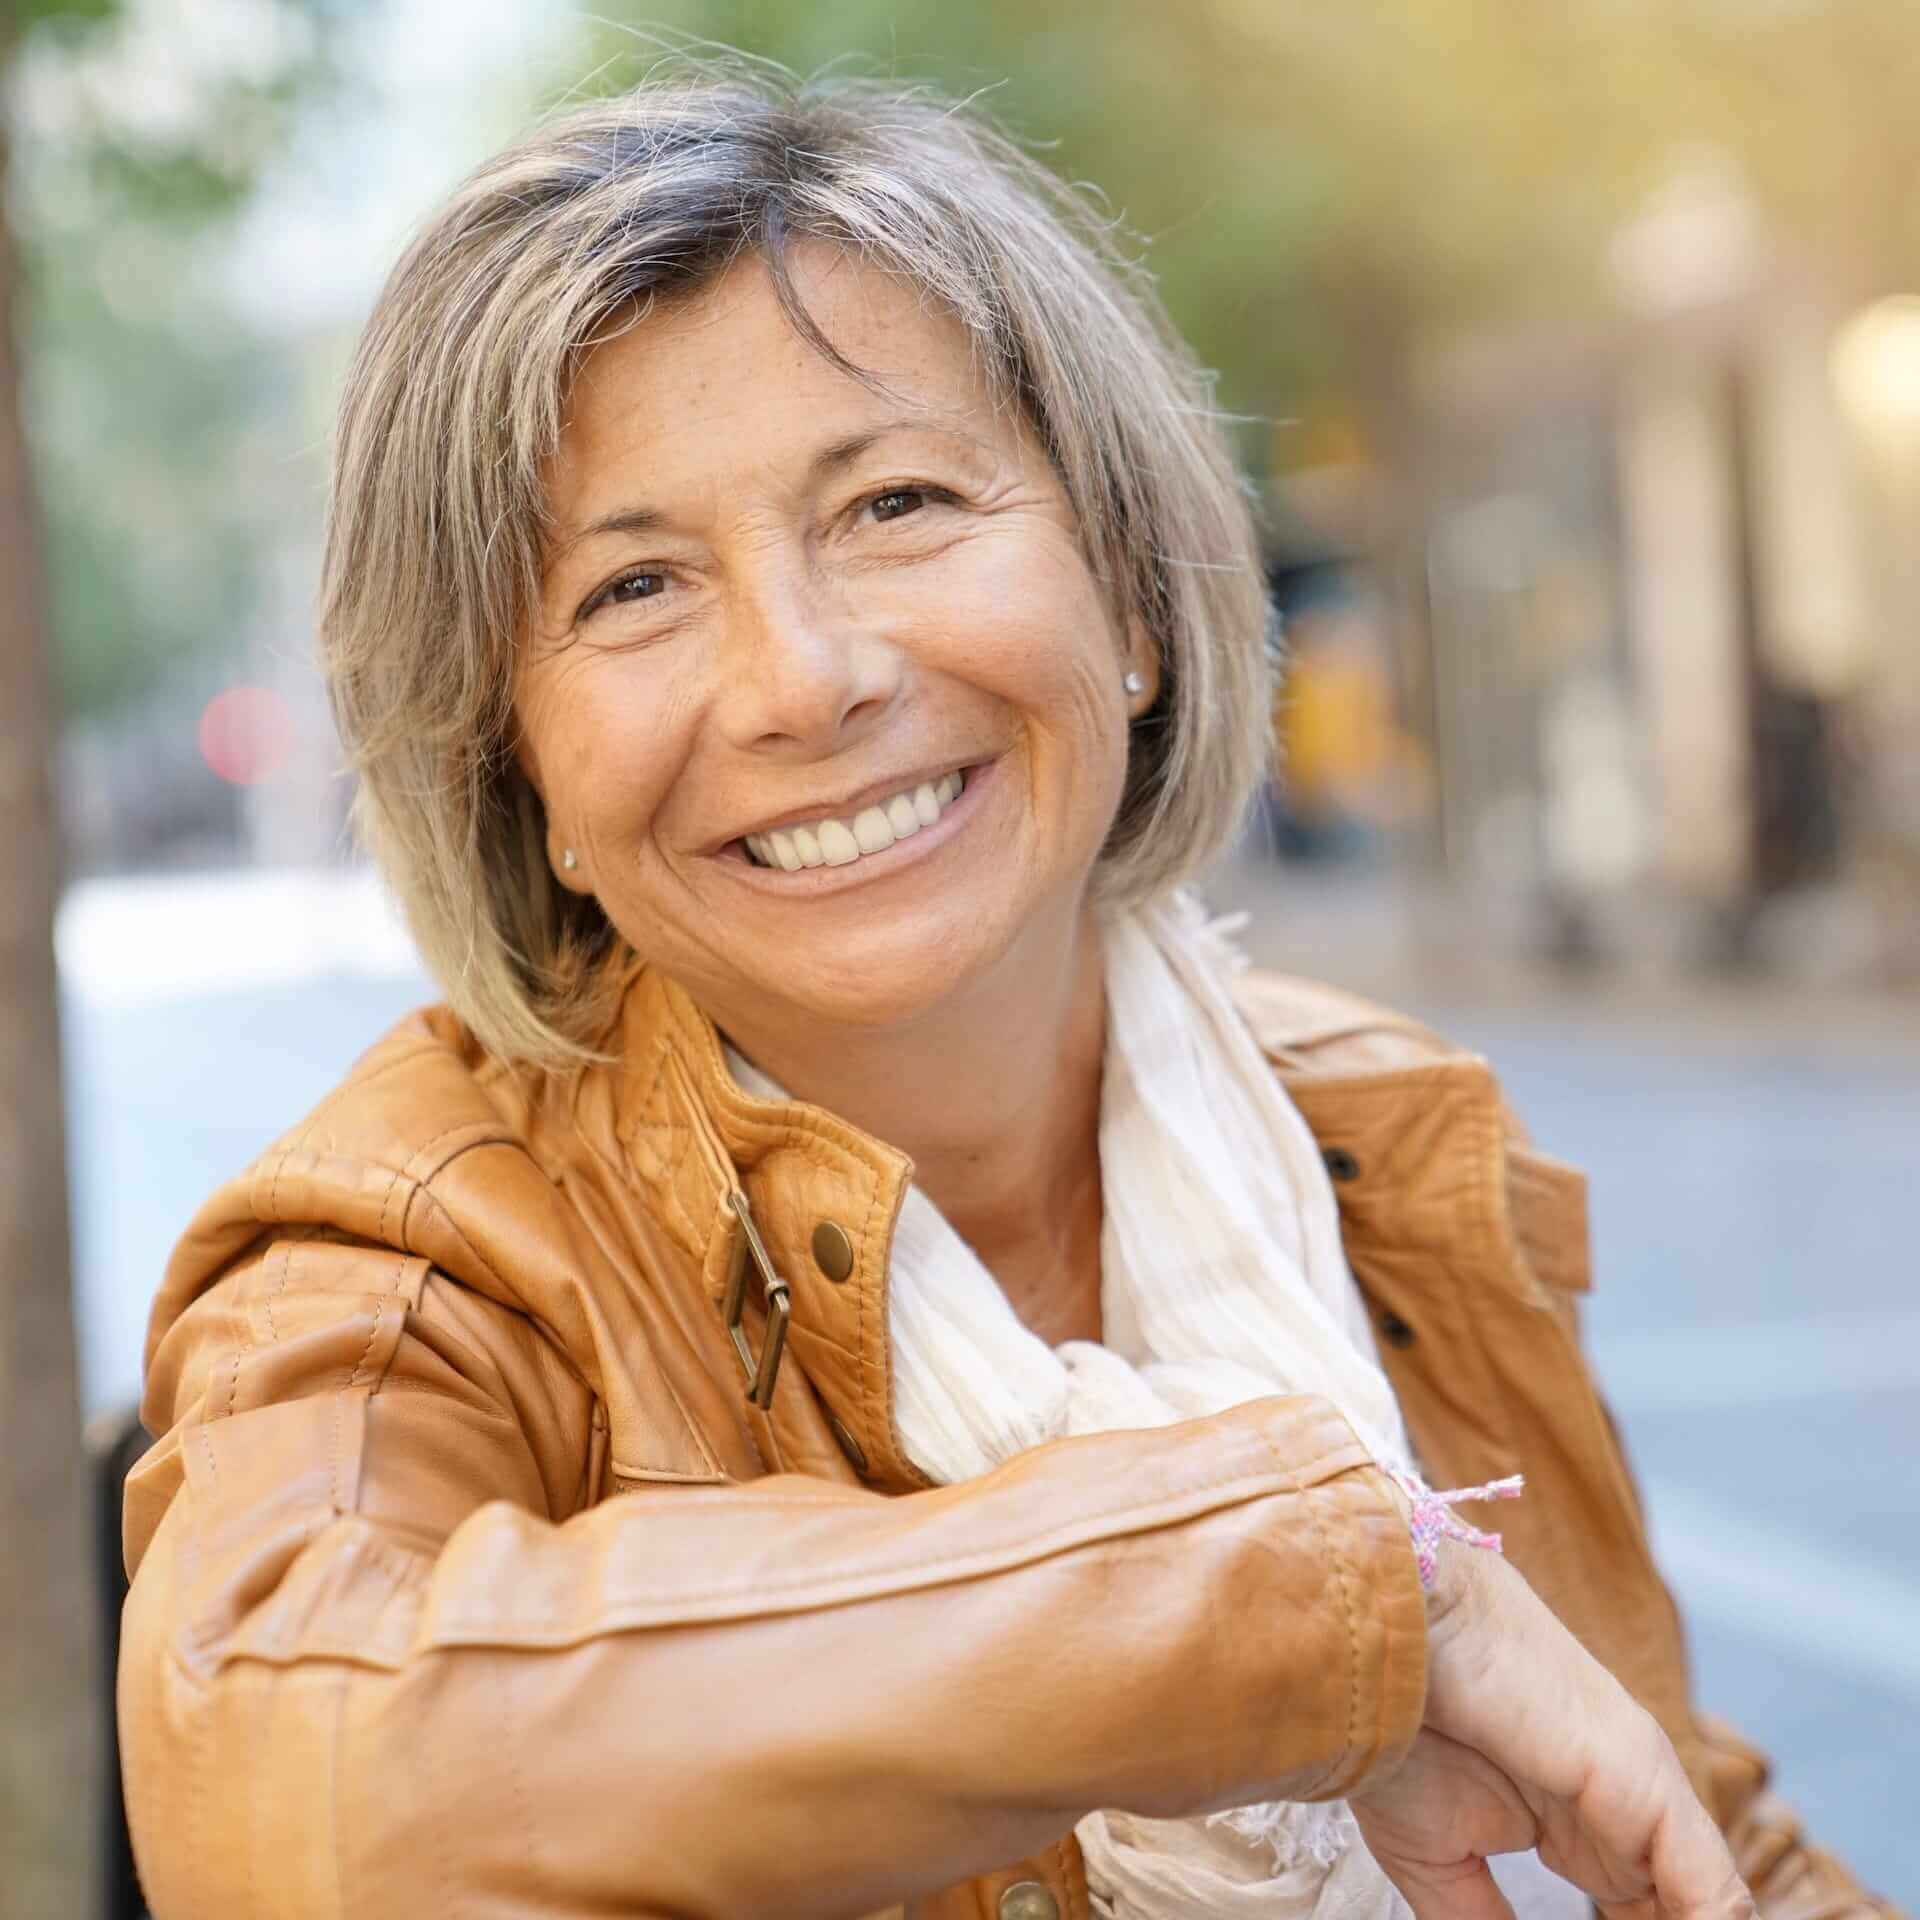 Smiling older woman sitting outside on a bench